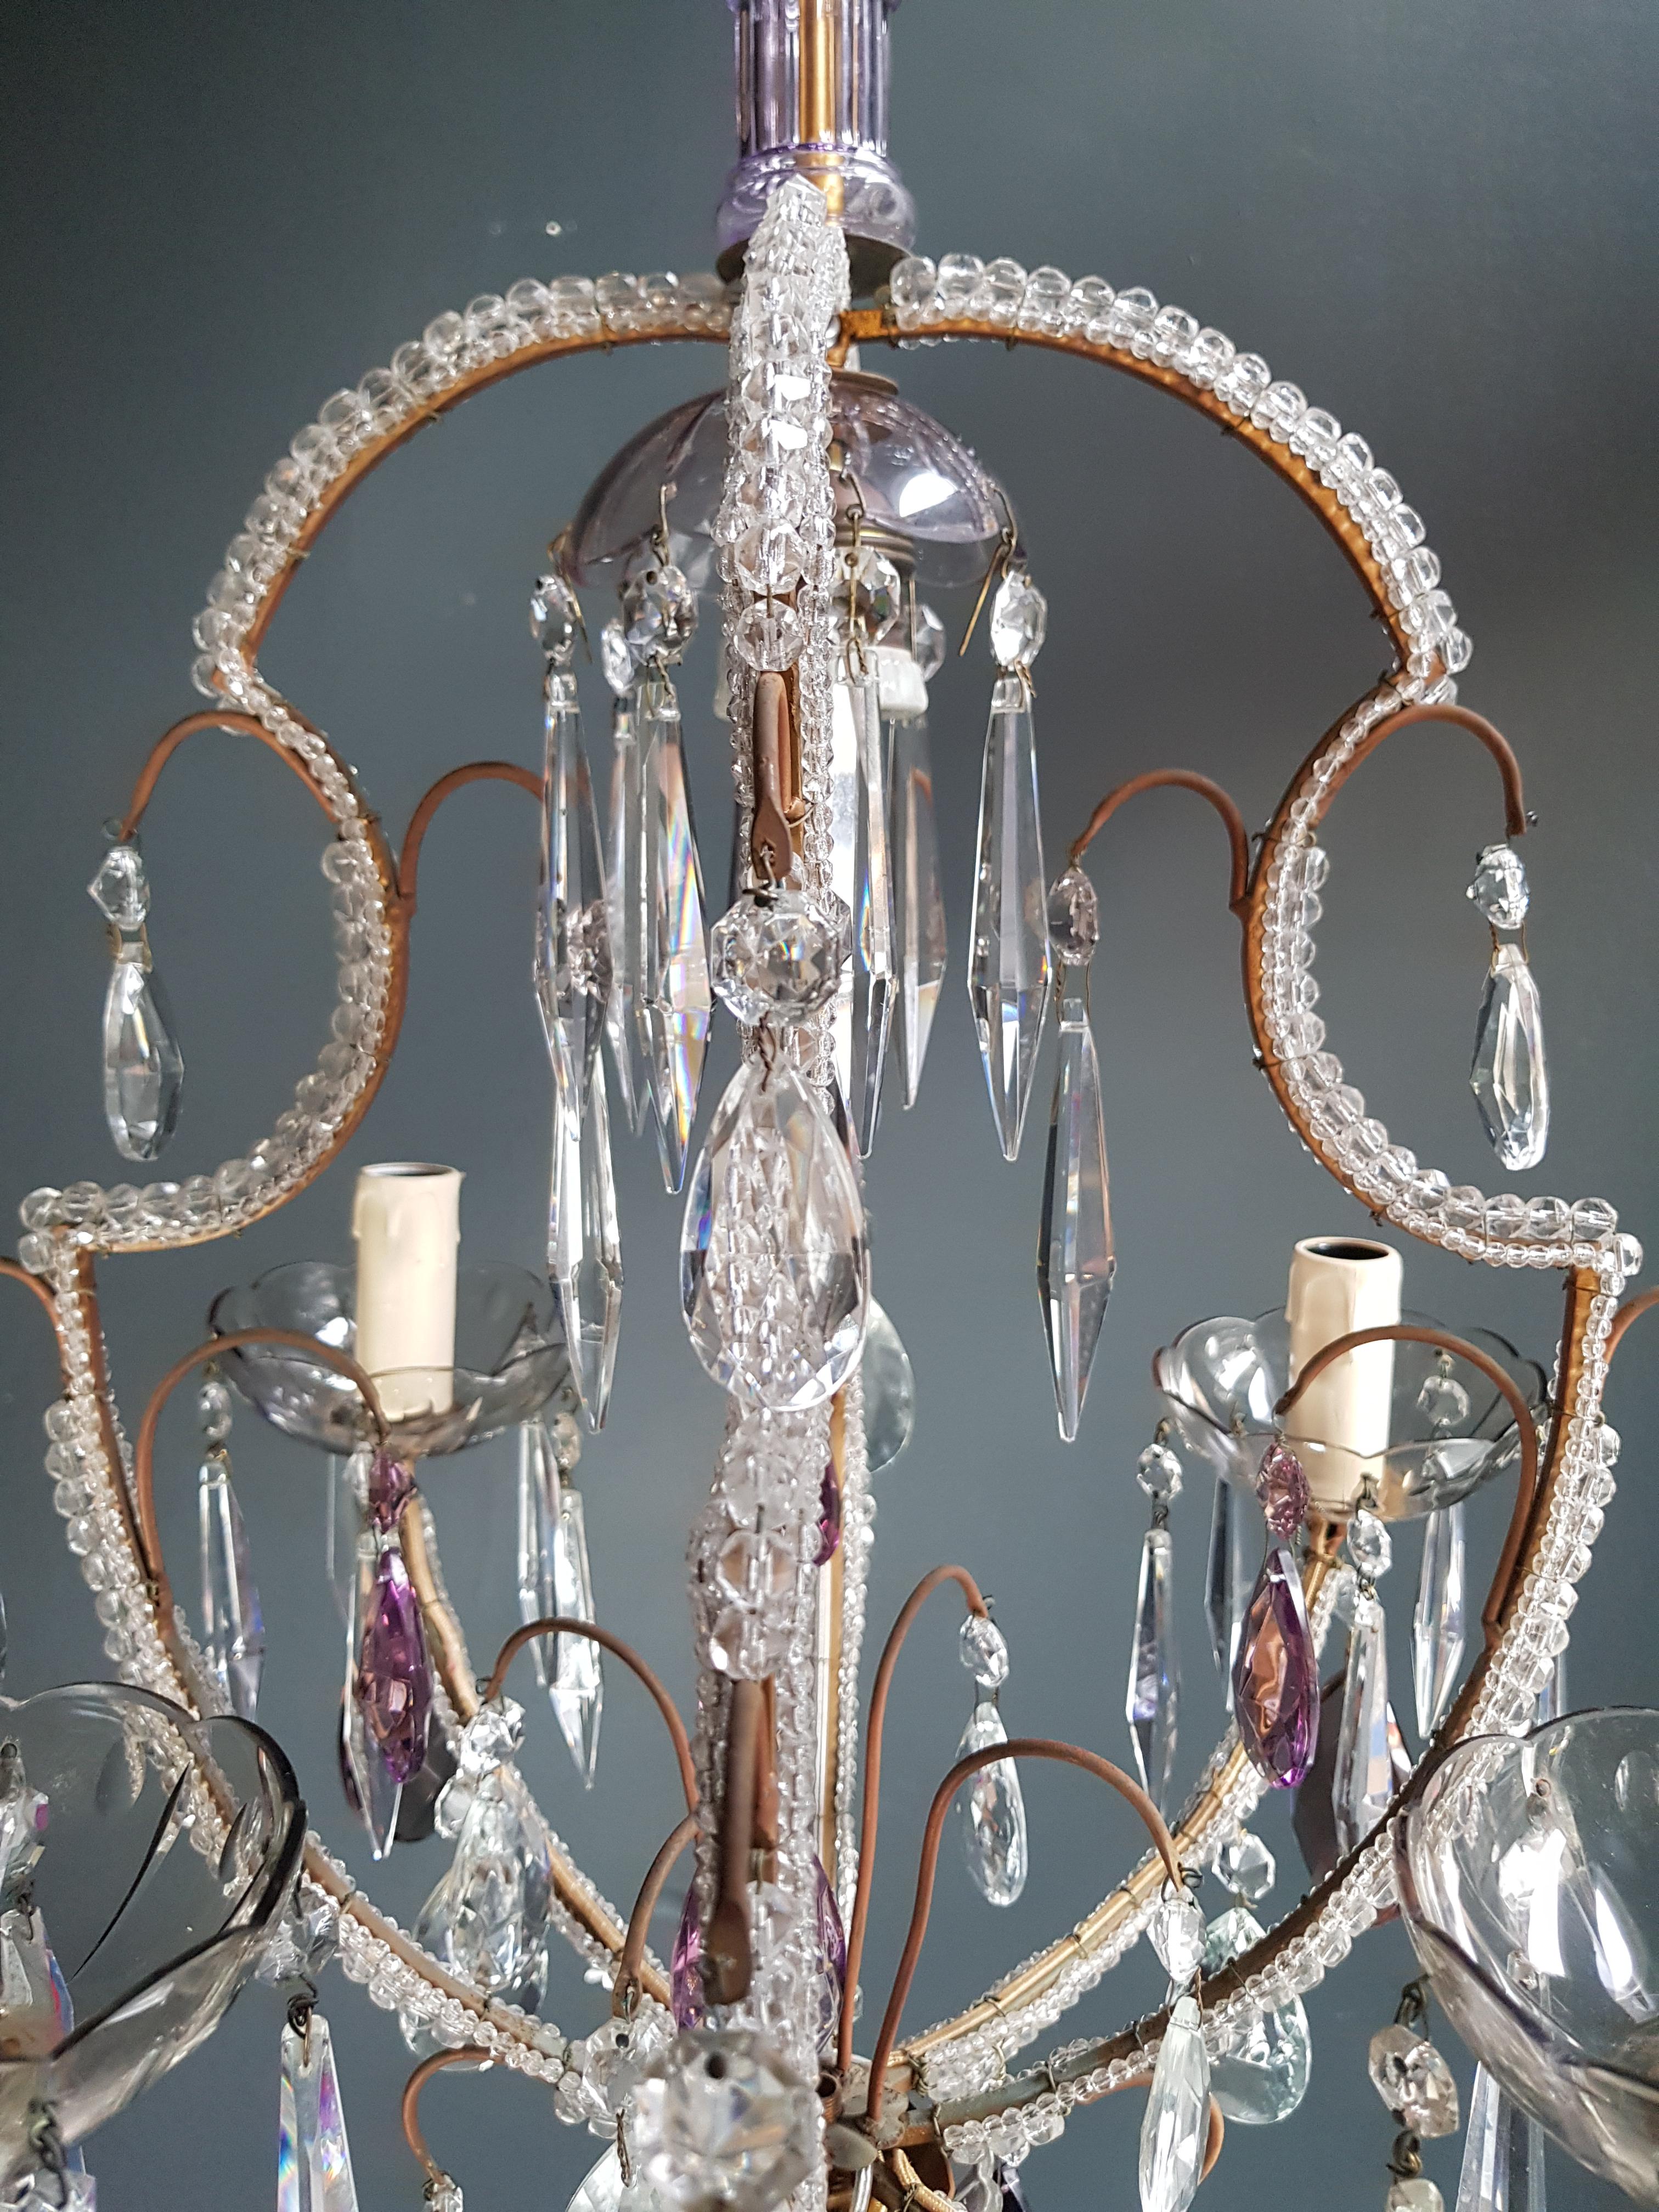 Hand-Knotted Fine Beaded Cage Purple Crystal Chandelier Antique Ceiling Lamp Lustre Art Deco